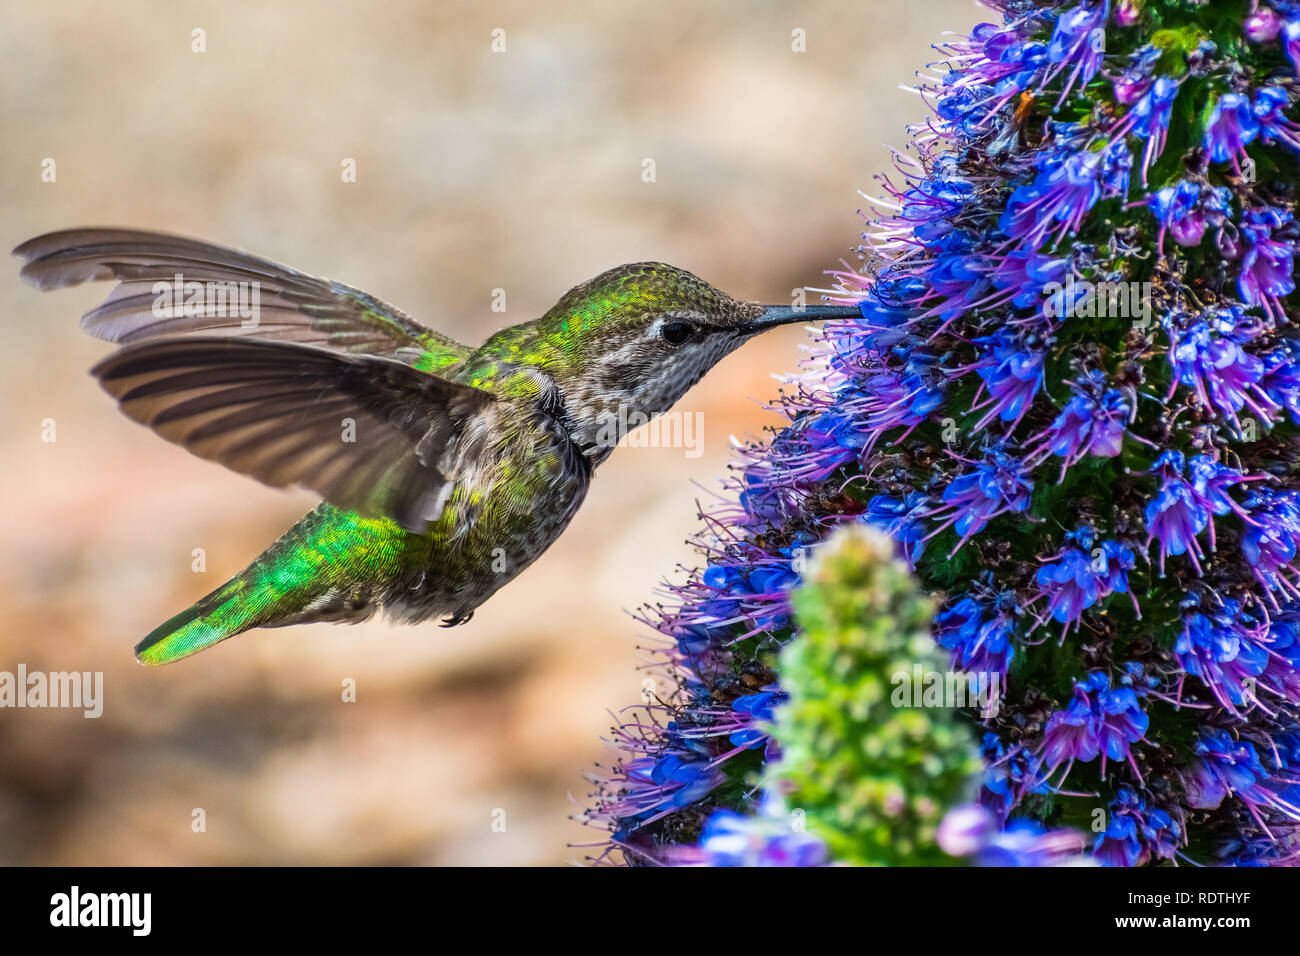 Close up of female Anna's Hummingbird drinking nectar from a Pride of Madeira flower, San Francisco bay area, California Stock Photo